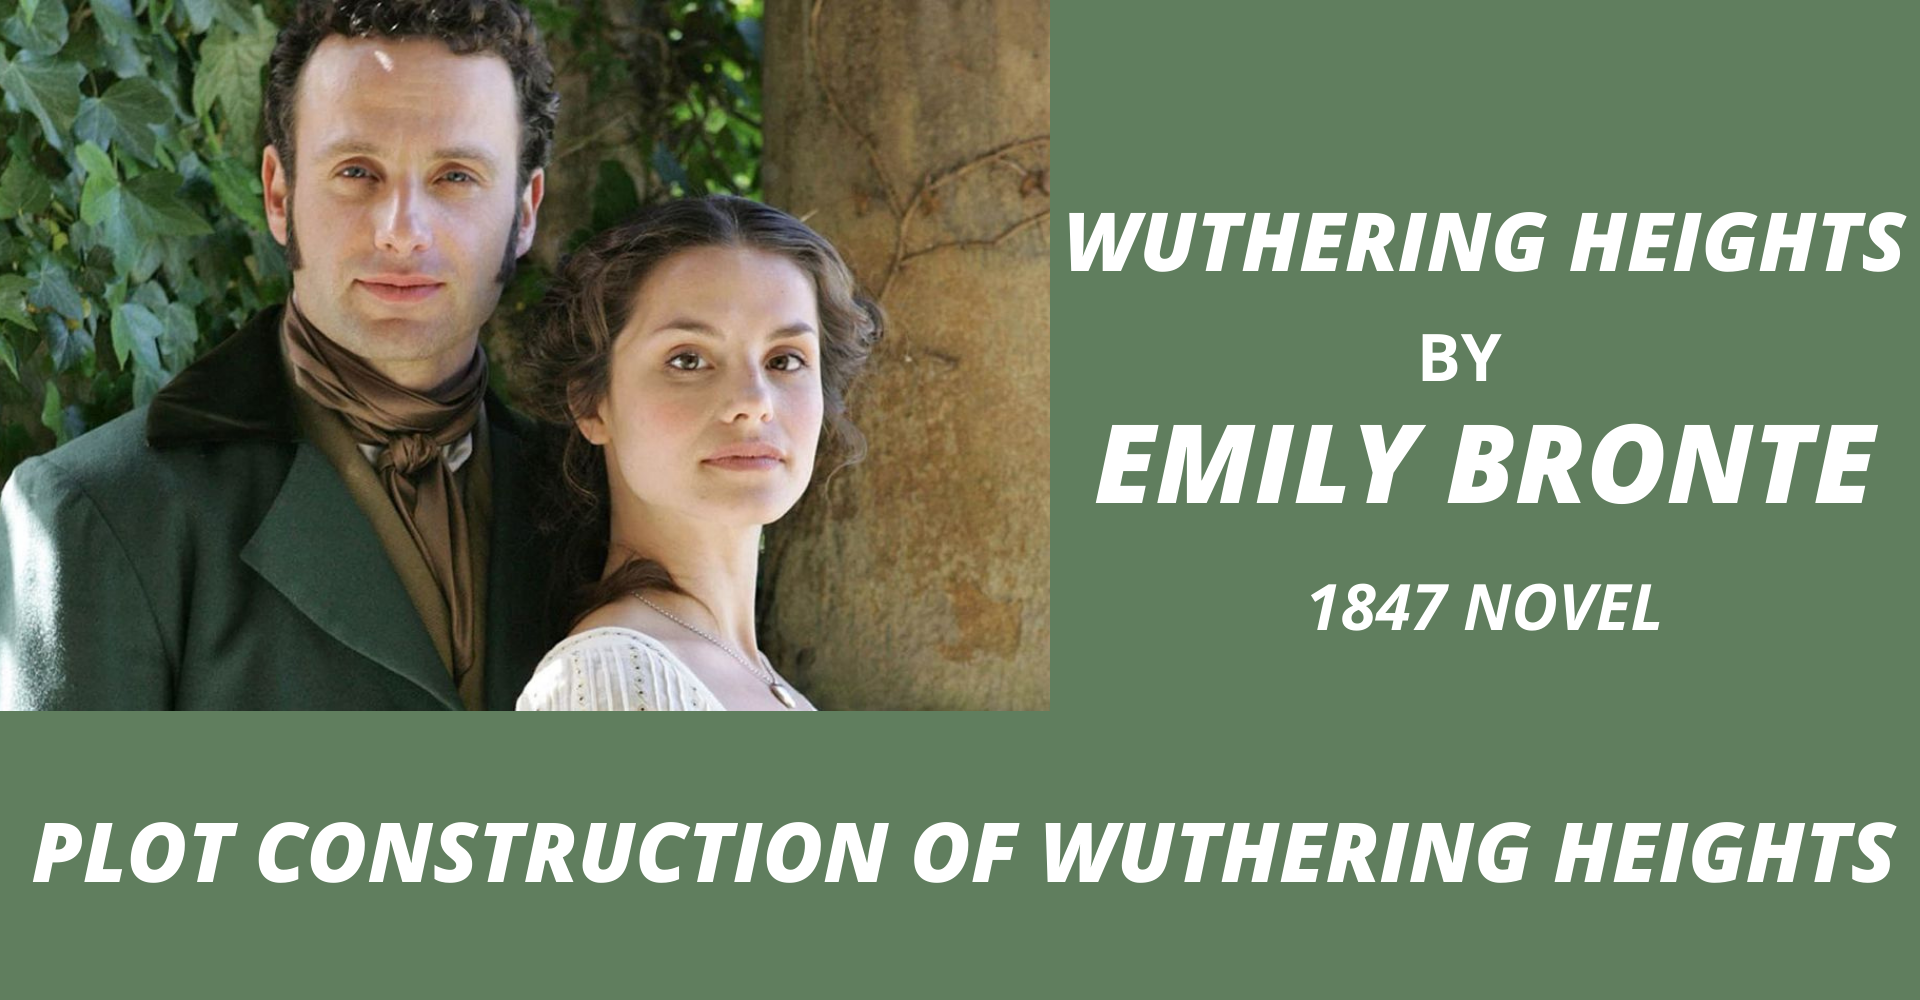 is wuthering heights a love story